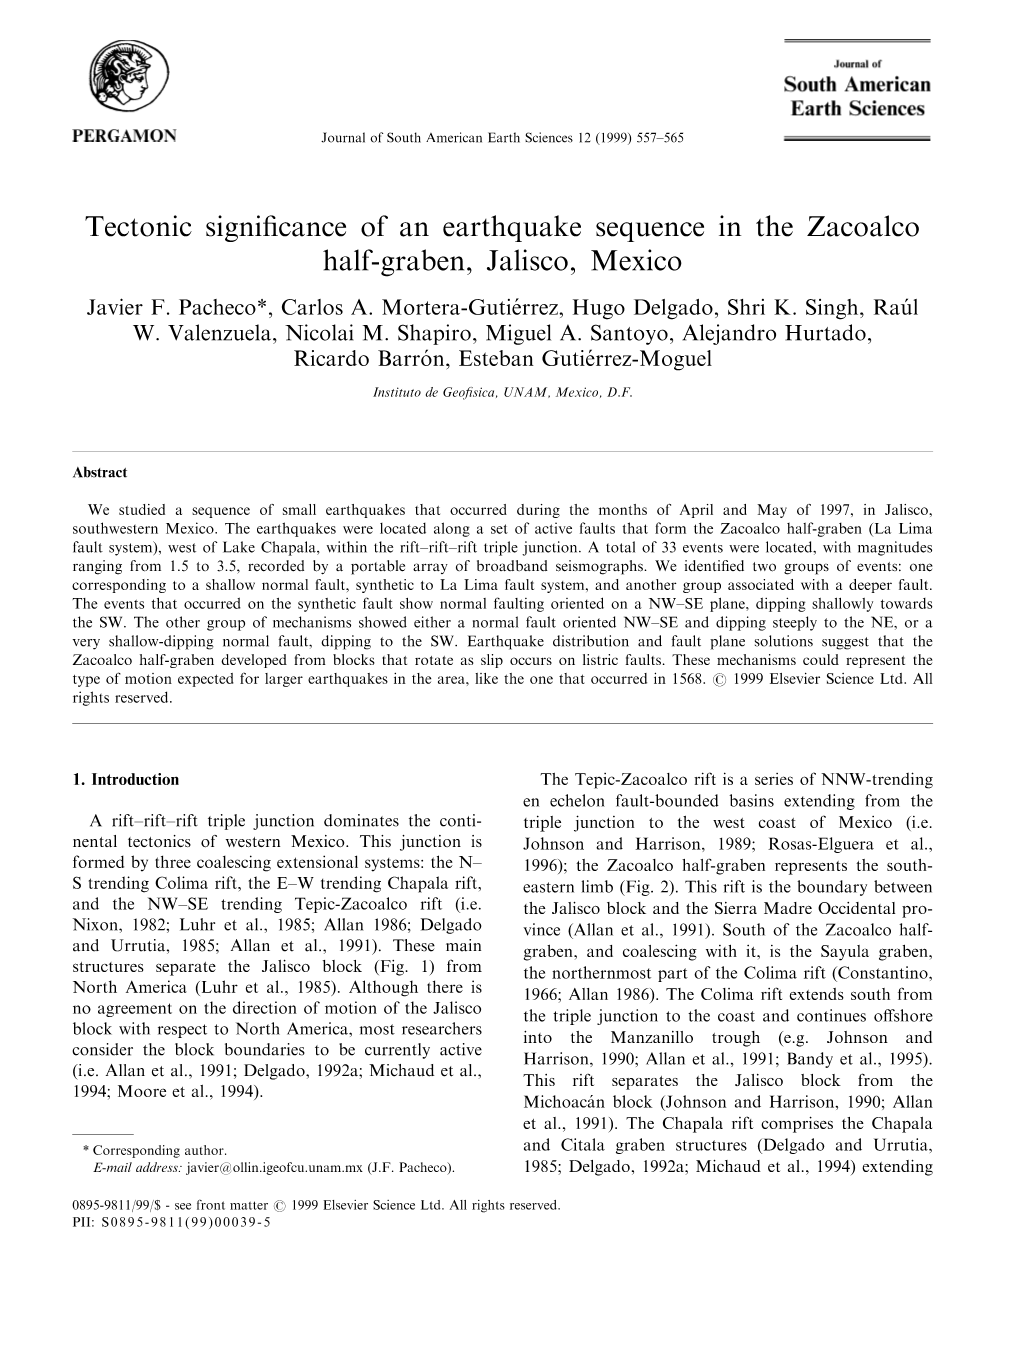 Tectonic Significance of an Earthquake Sequence in the Zacoalco Half